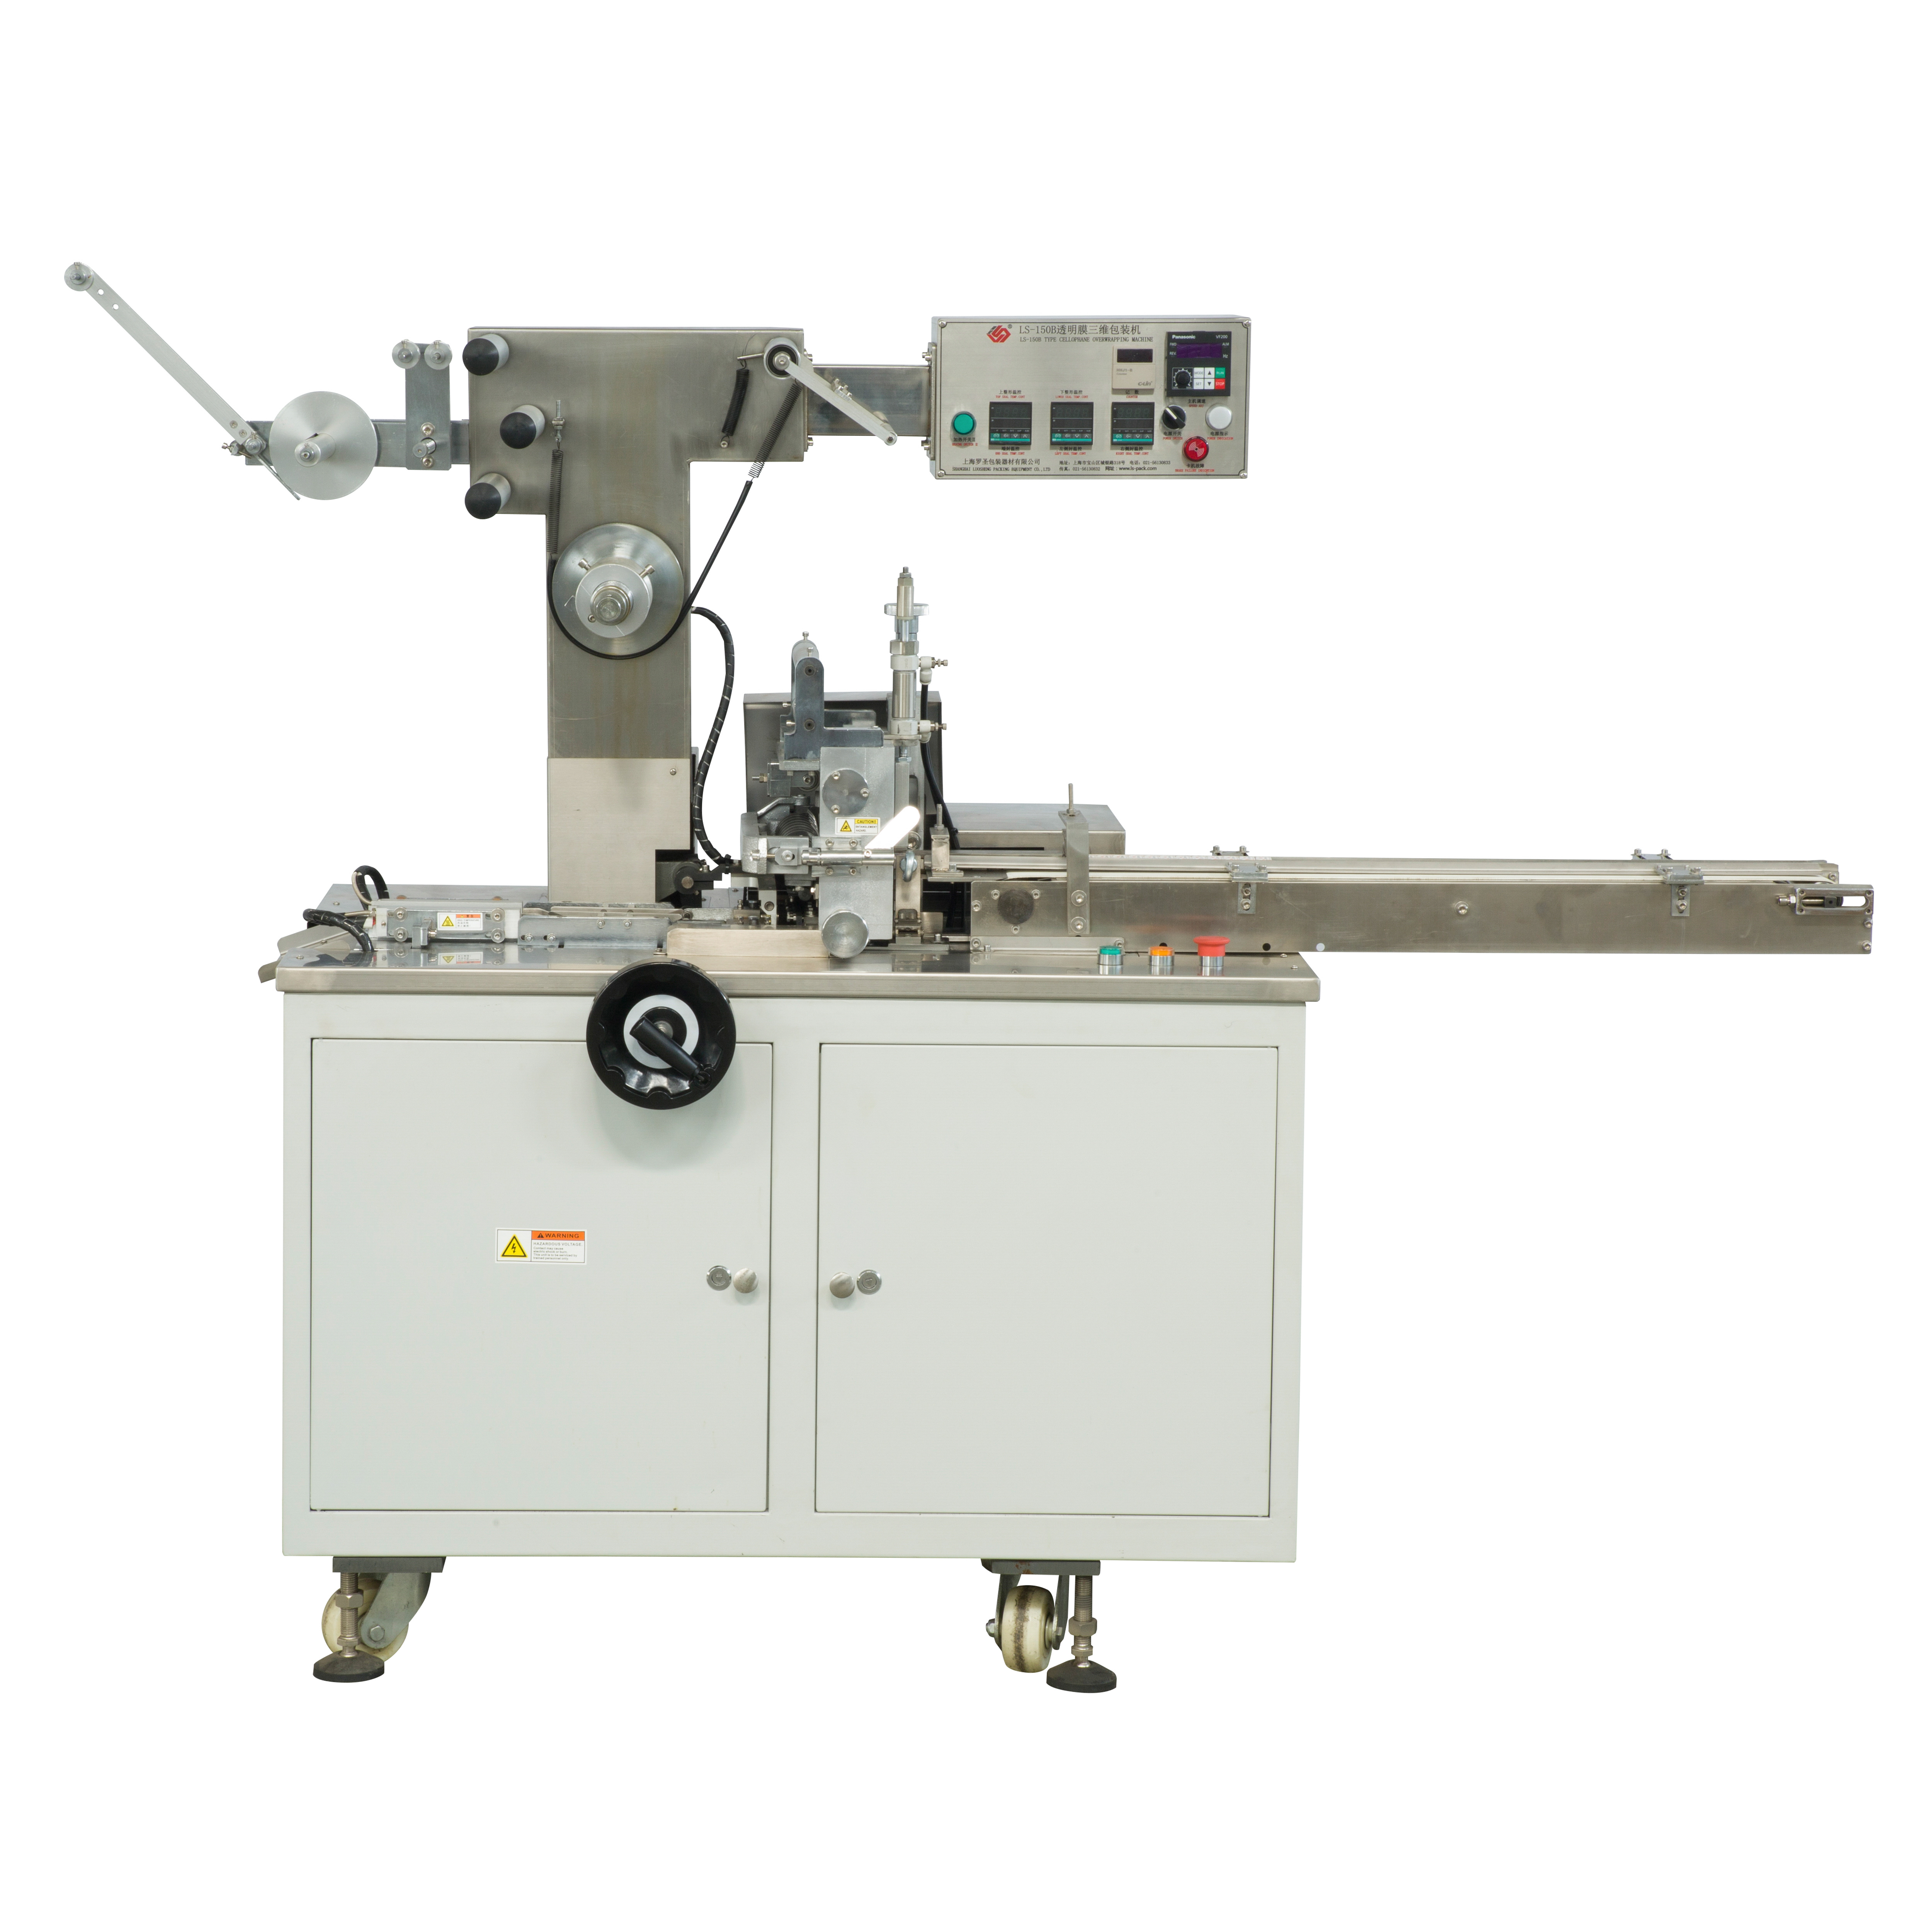 How to Choose the Right Overwrapper Machine for Your Product